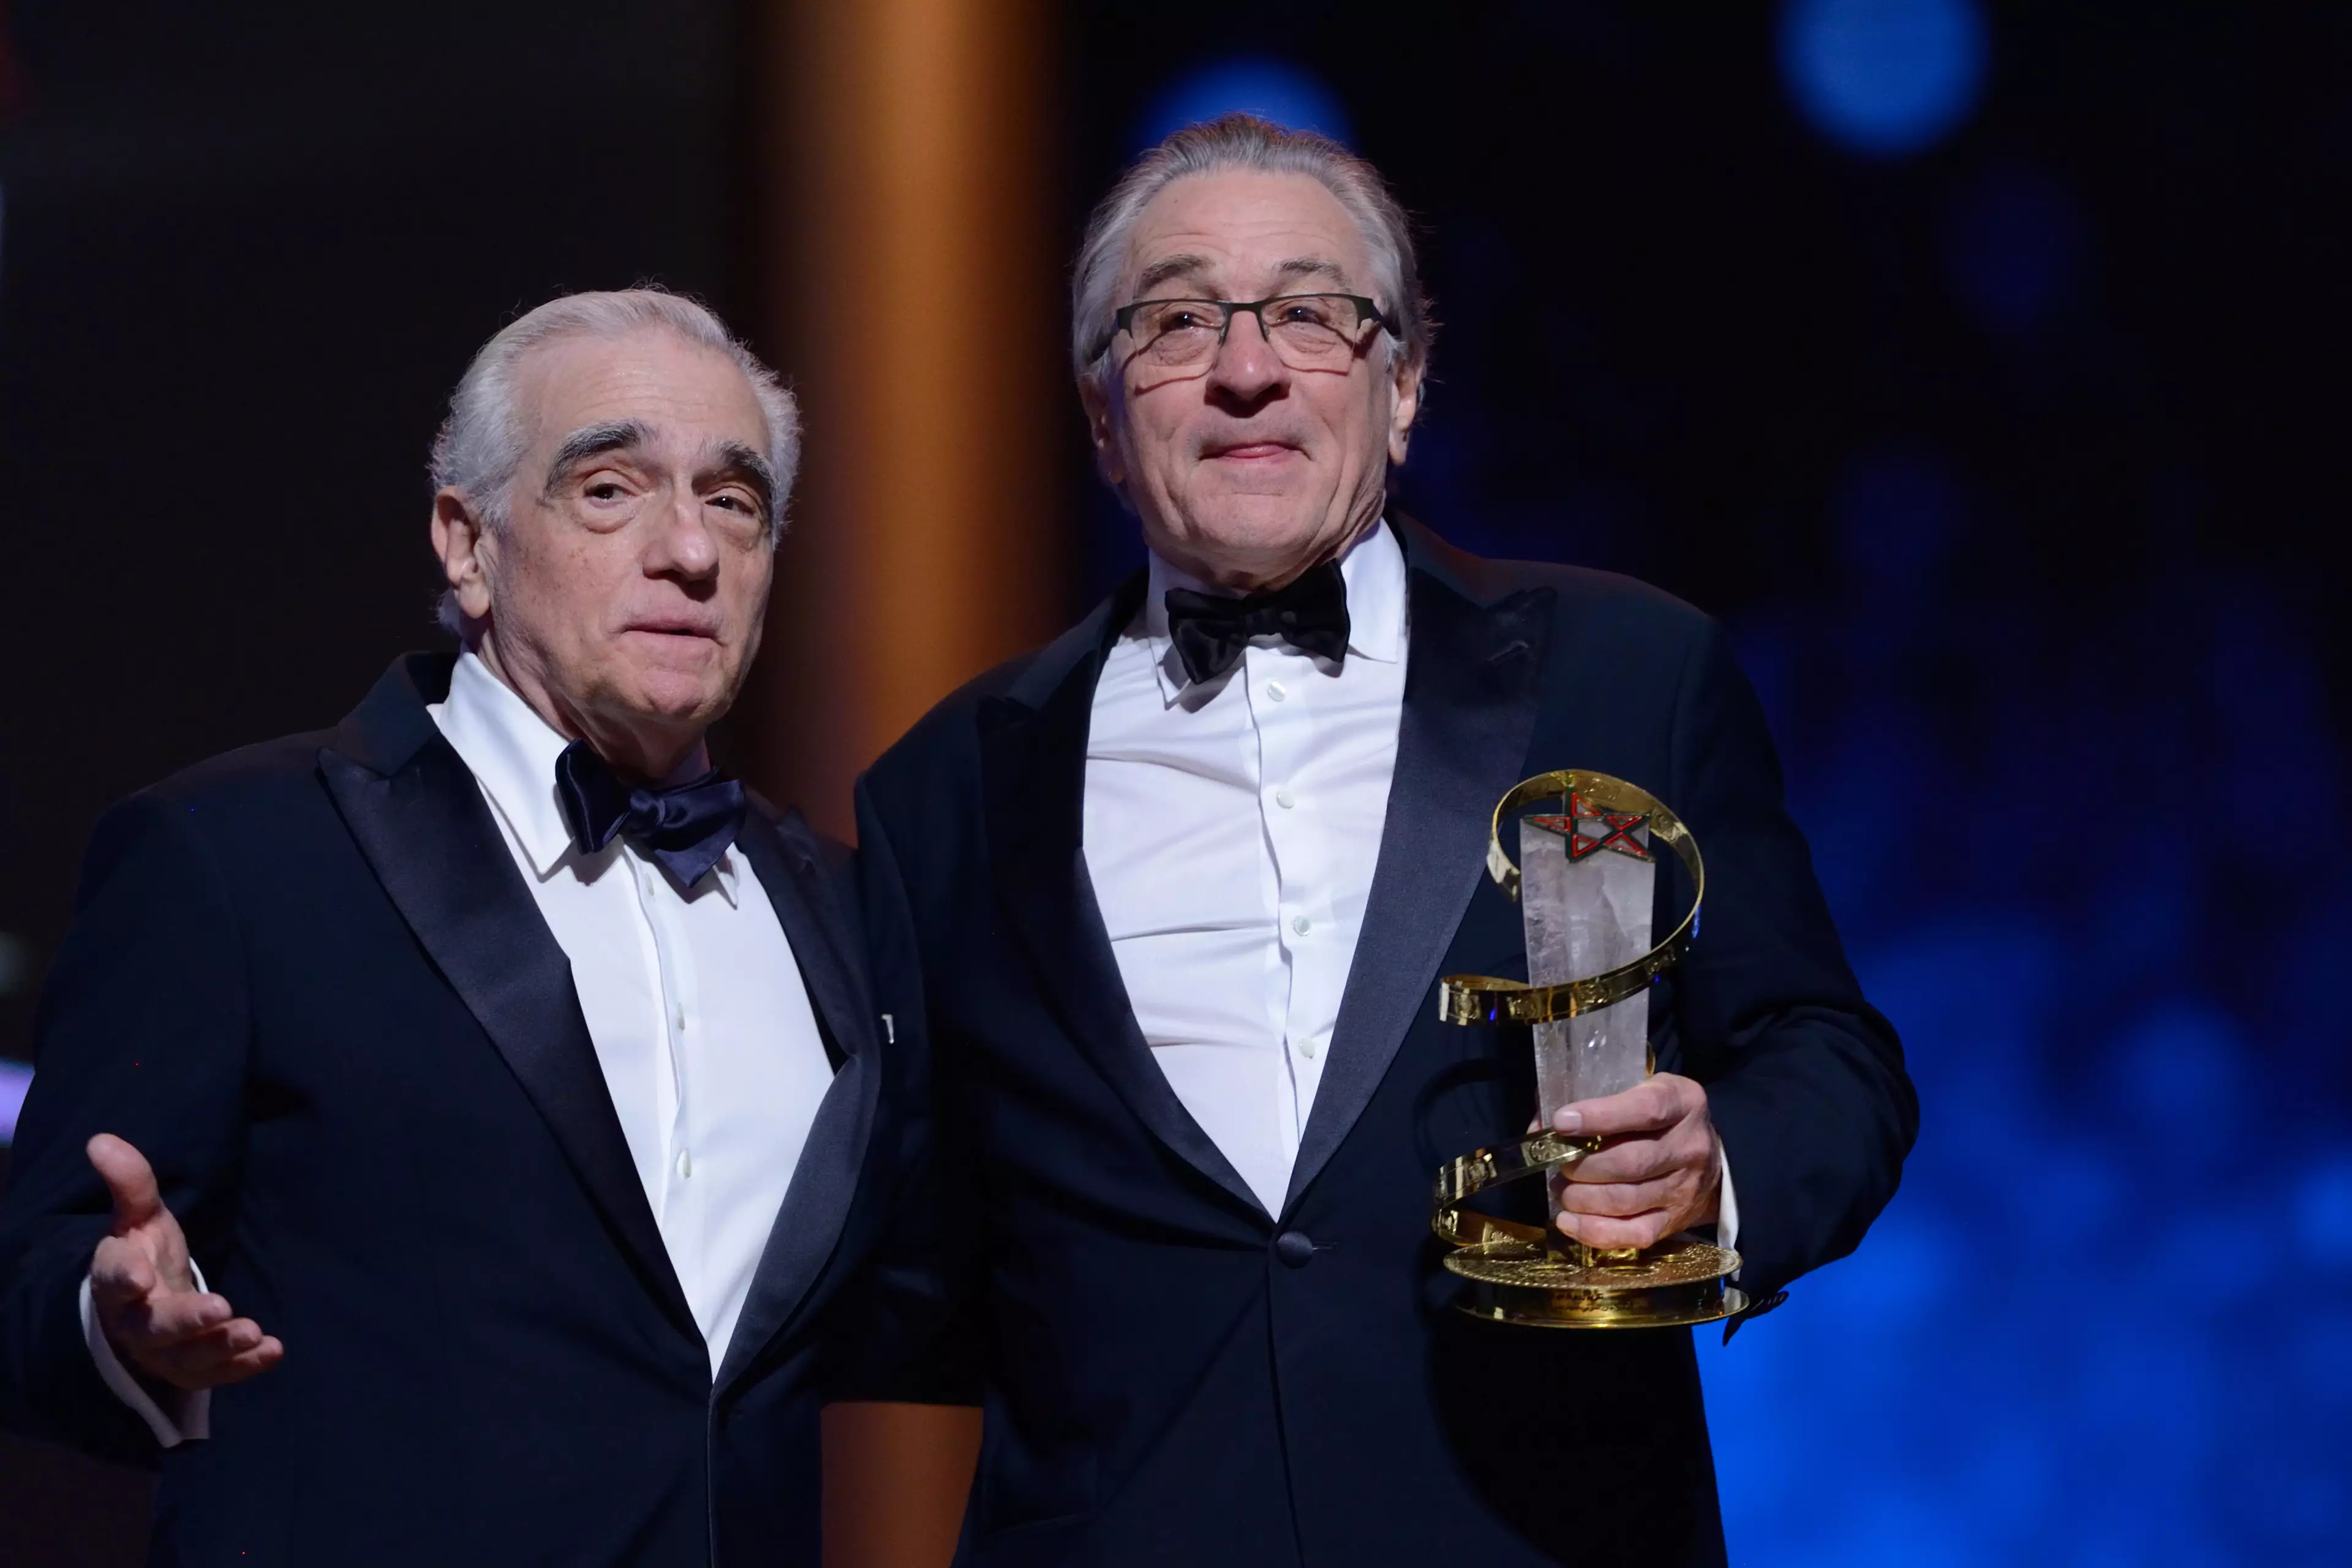 De Niro and Scorsese have worked together before.